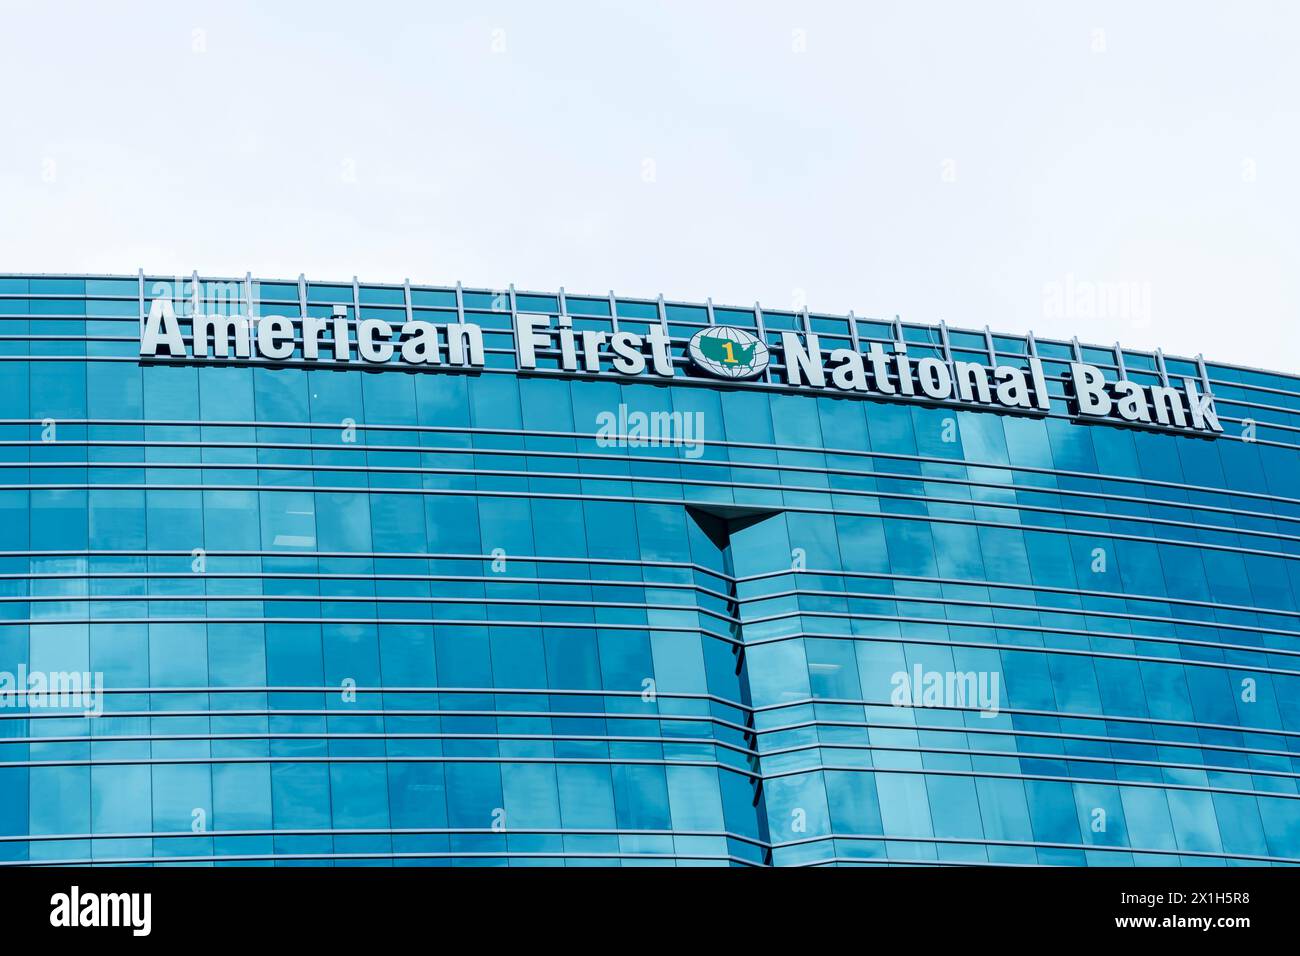 American First National Bank headquarters in Houston, Texas, USA. Stock Photo